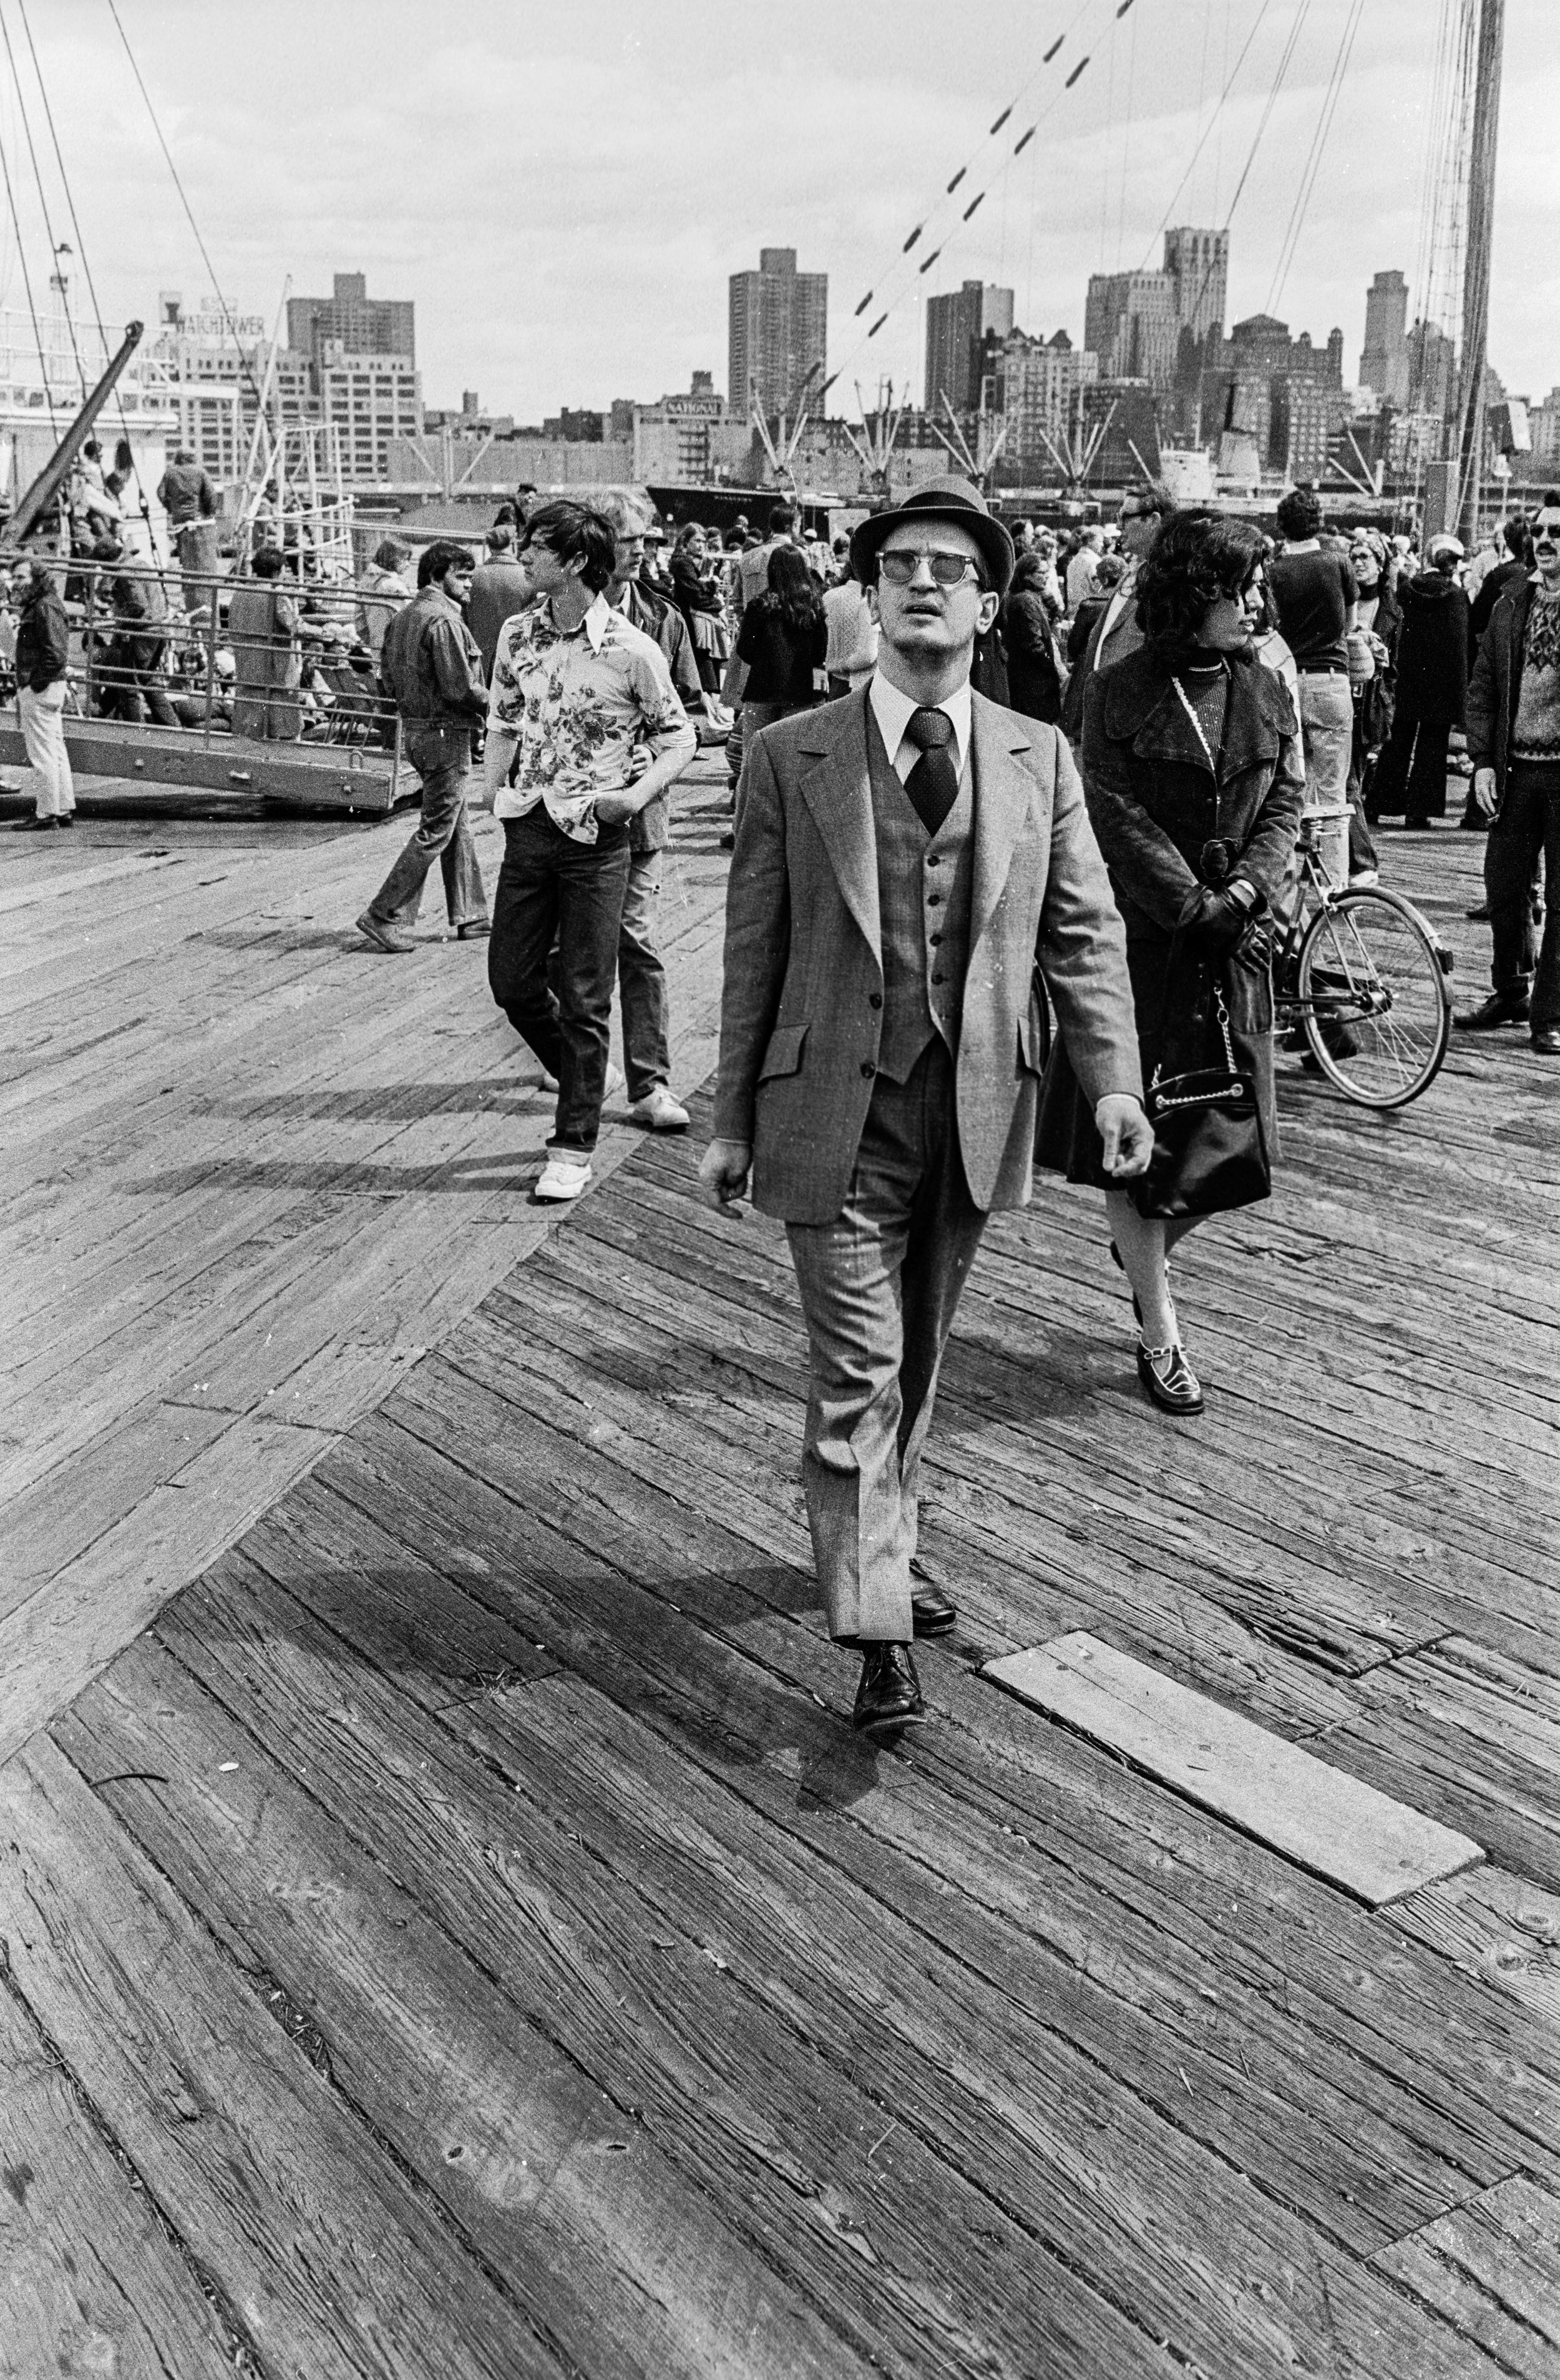   South Street Seaport, NYC, 1975  